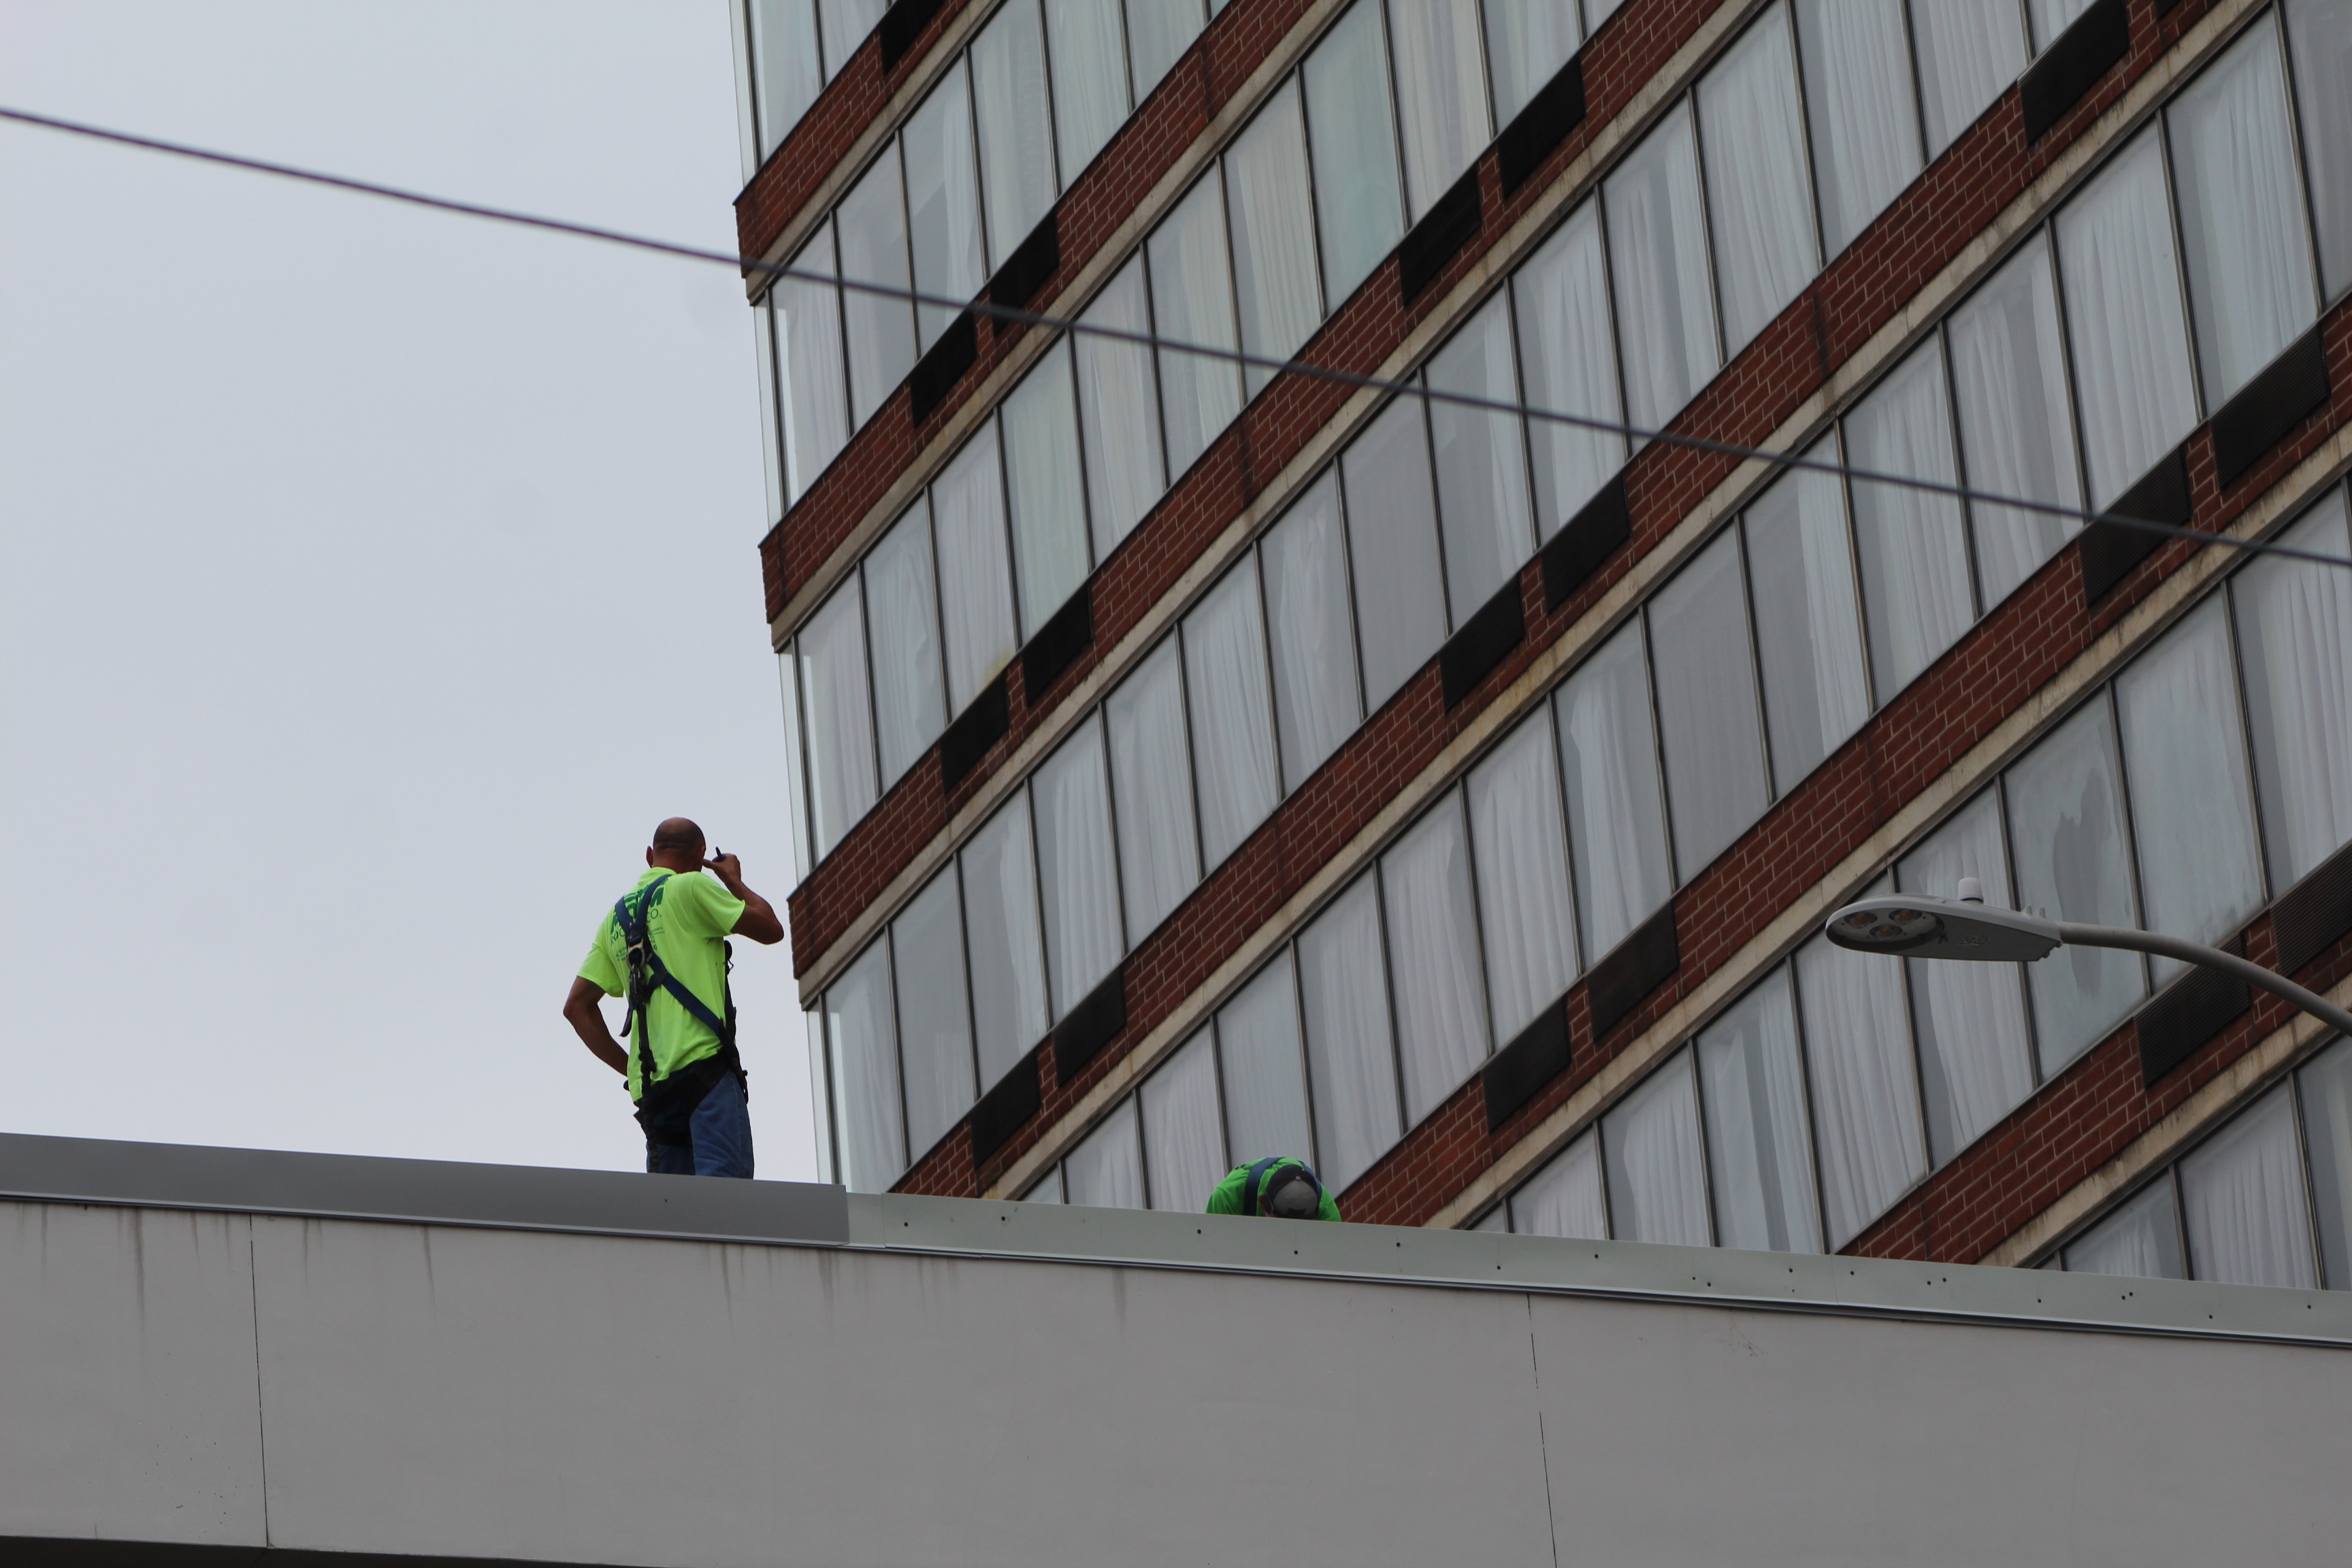 Crews work on the skywalk leading from the Dayton Convention Center to the hotel across the street and the parking garage. CORNELIUS FROLIK / STAFF